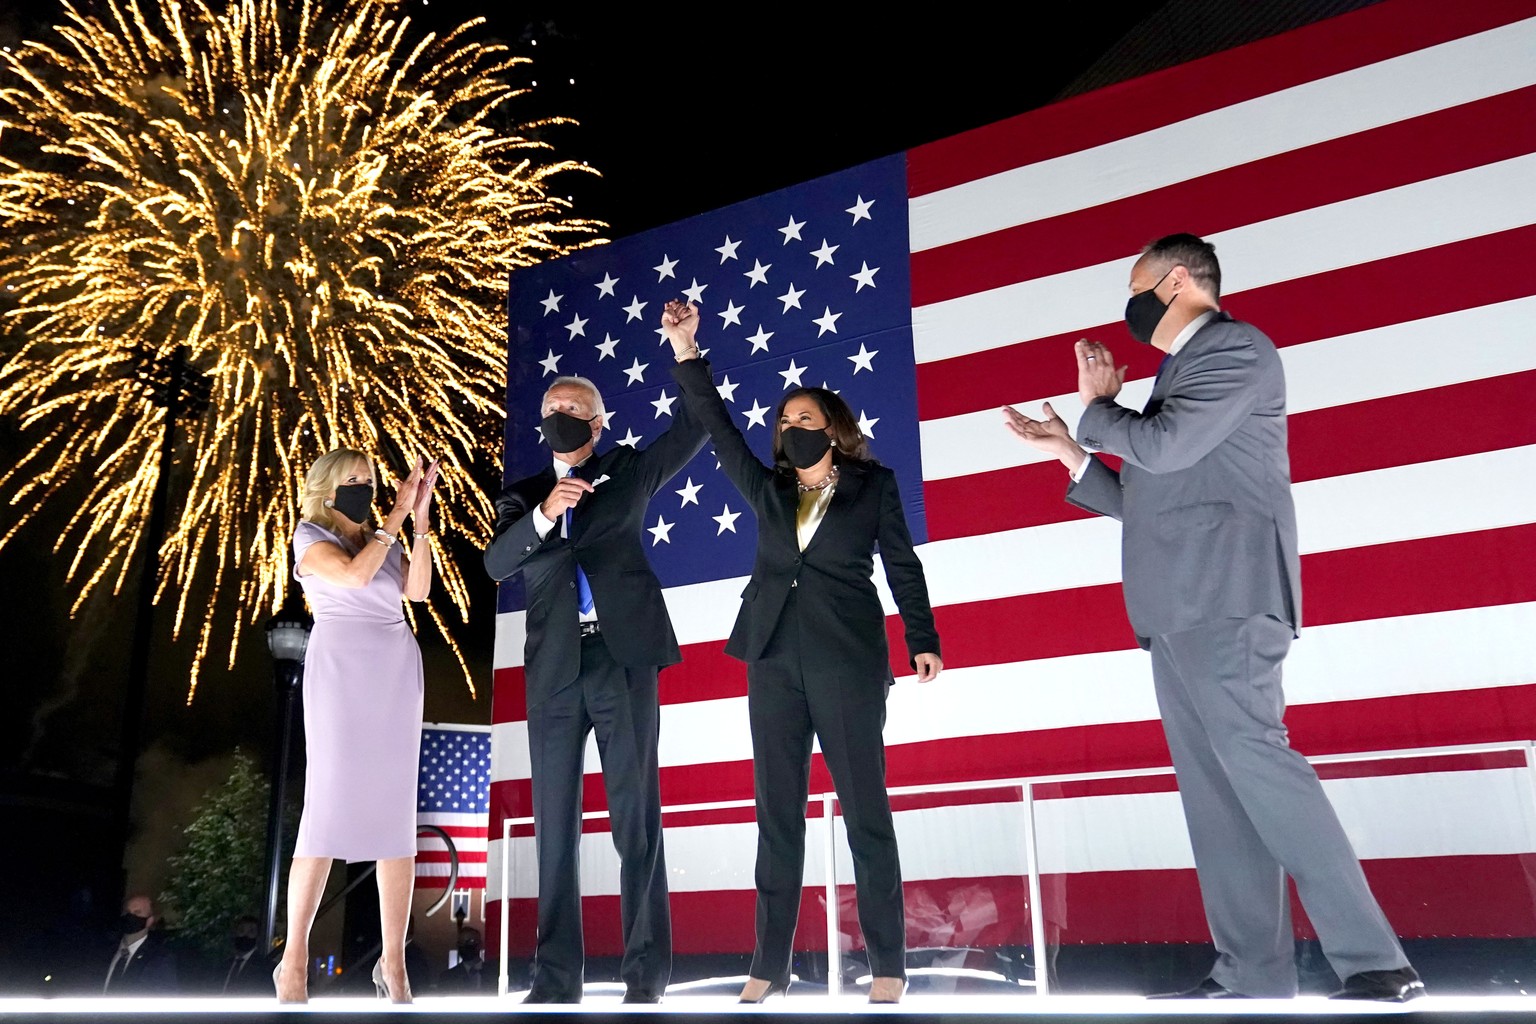 Democratic presidential candidate former Vice President Joe Biden, with Democratic vice presidential candidate Sen. Kamala Harris, D-Calif., raise their arms up as fireworks go off in the background d ...